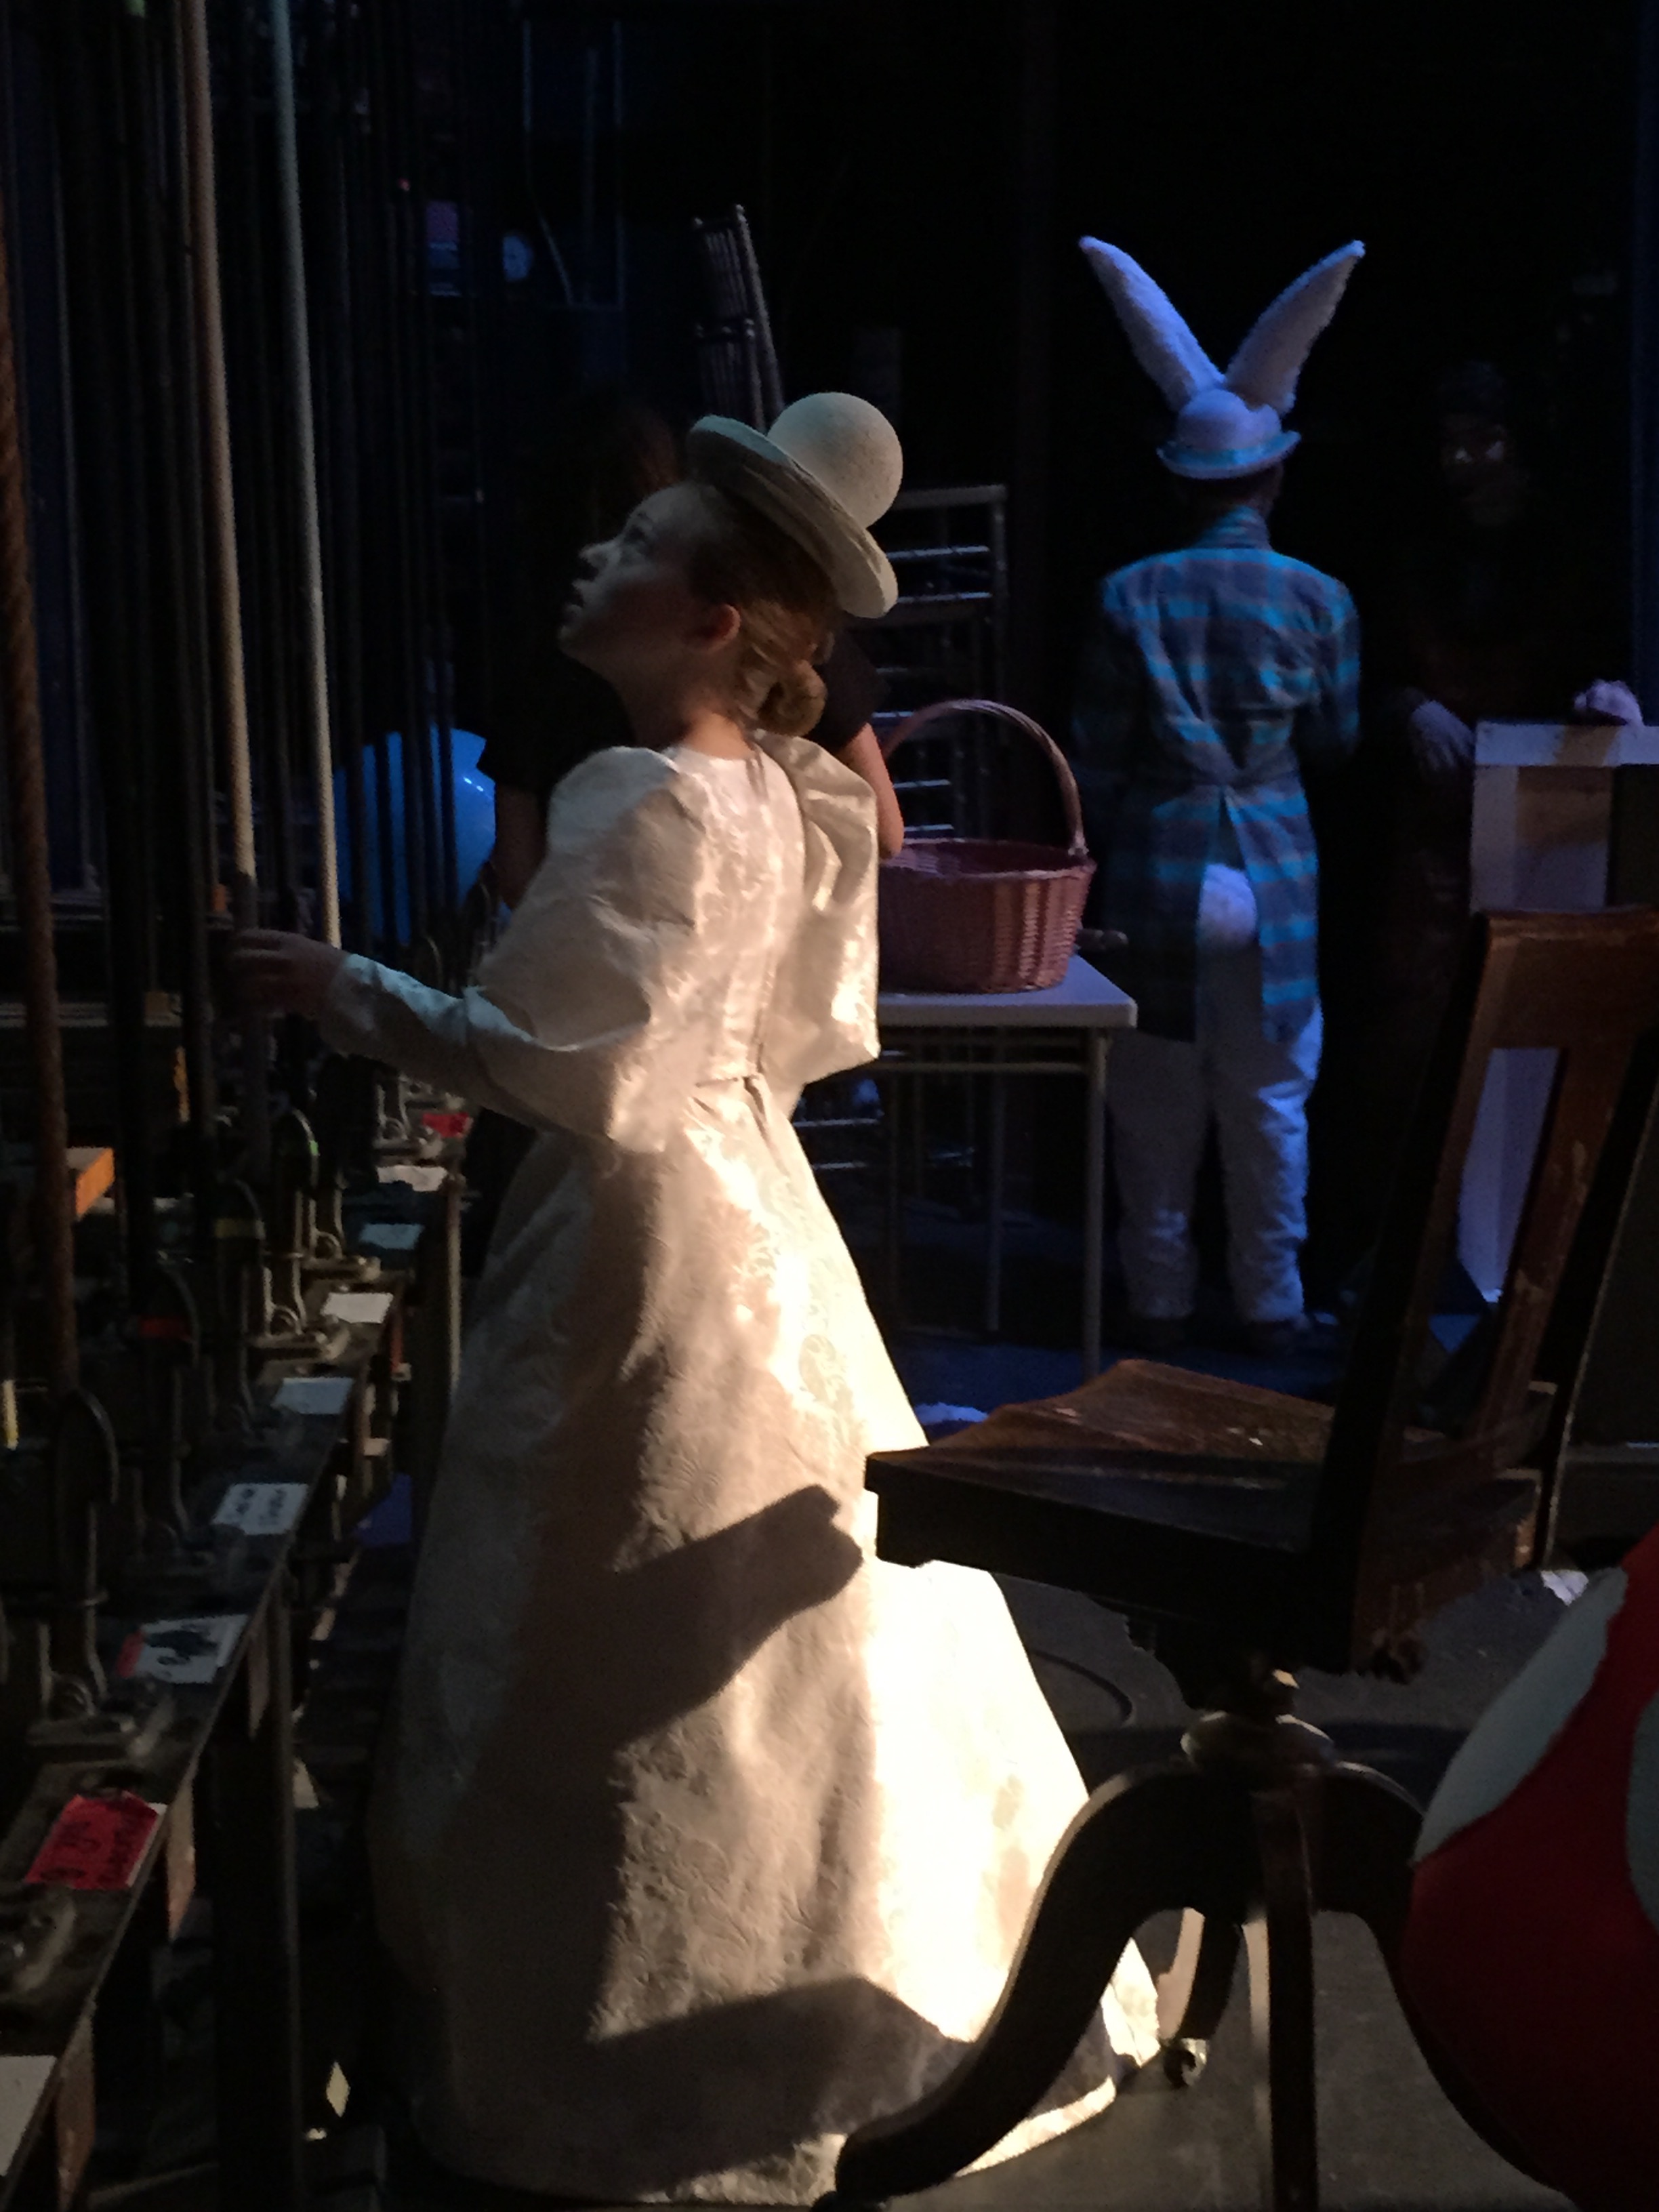 Chess Piece and Rabbit, Backstage